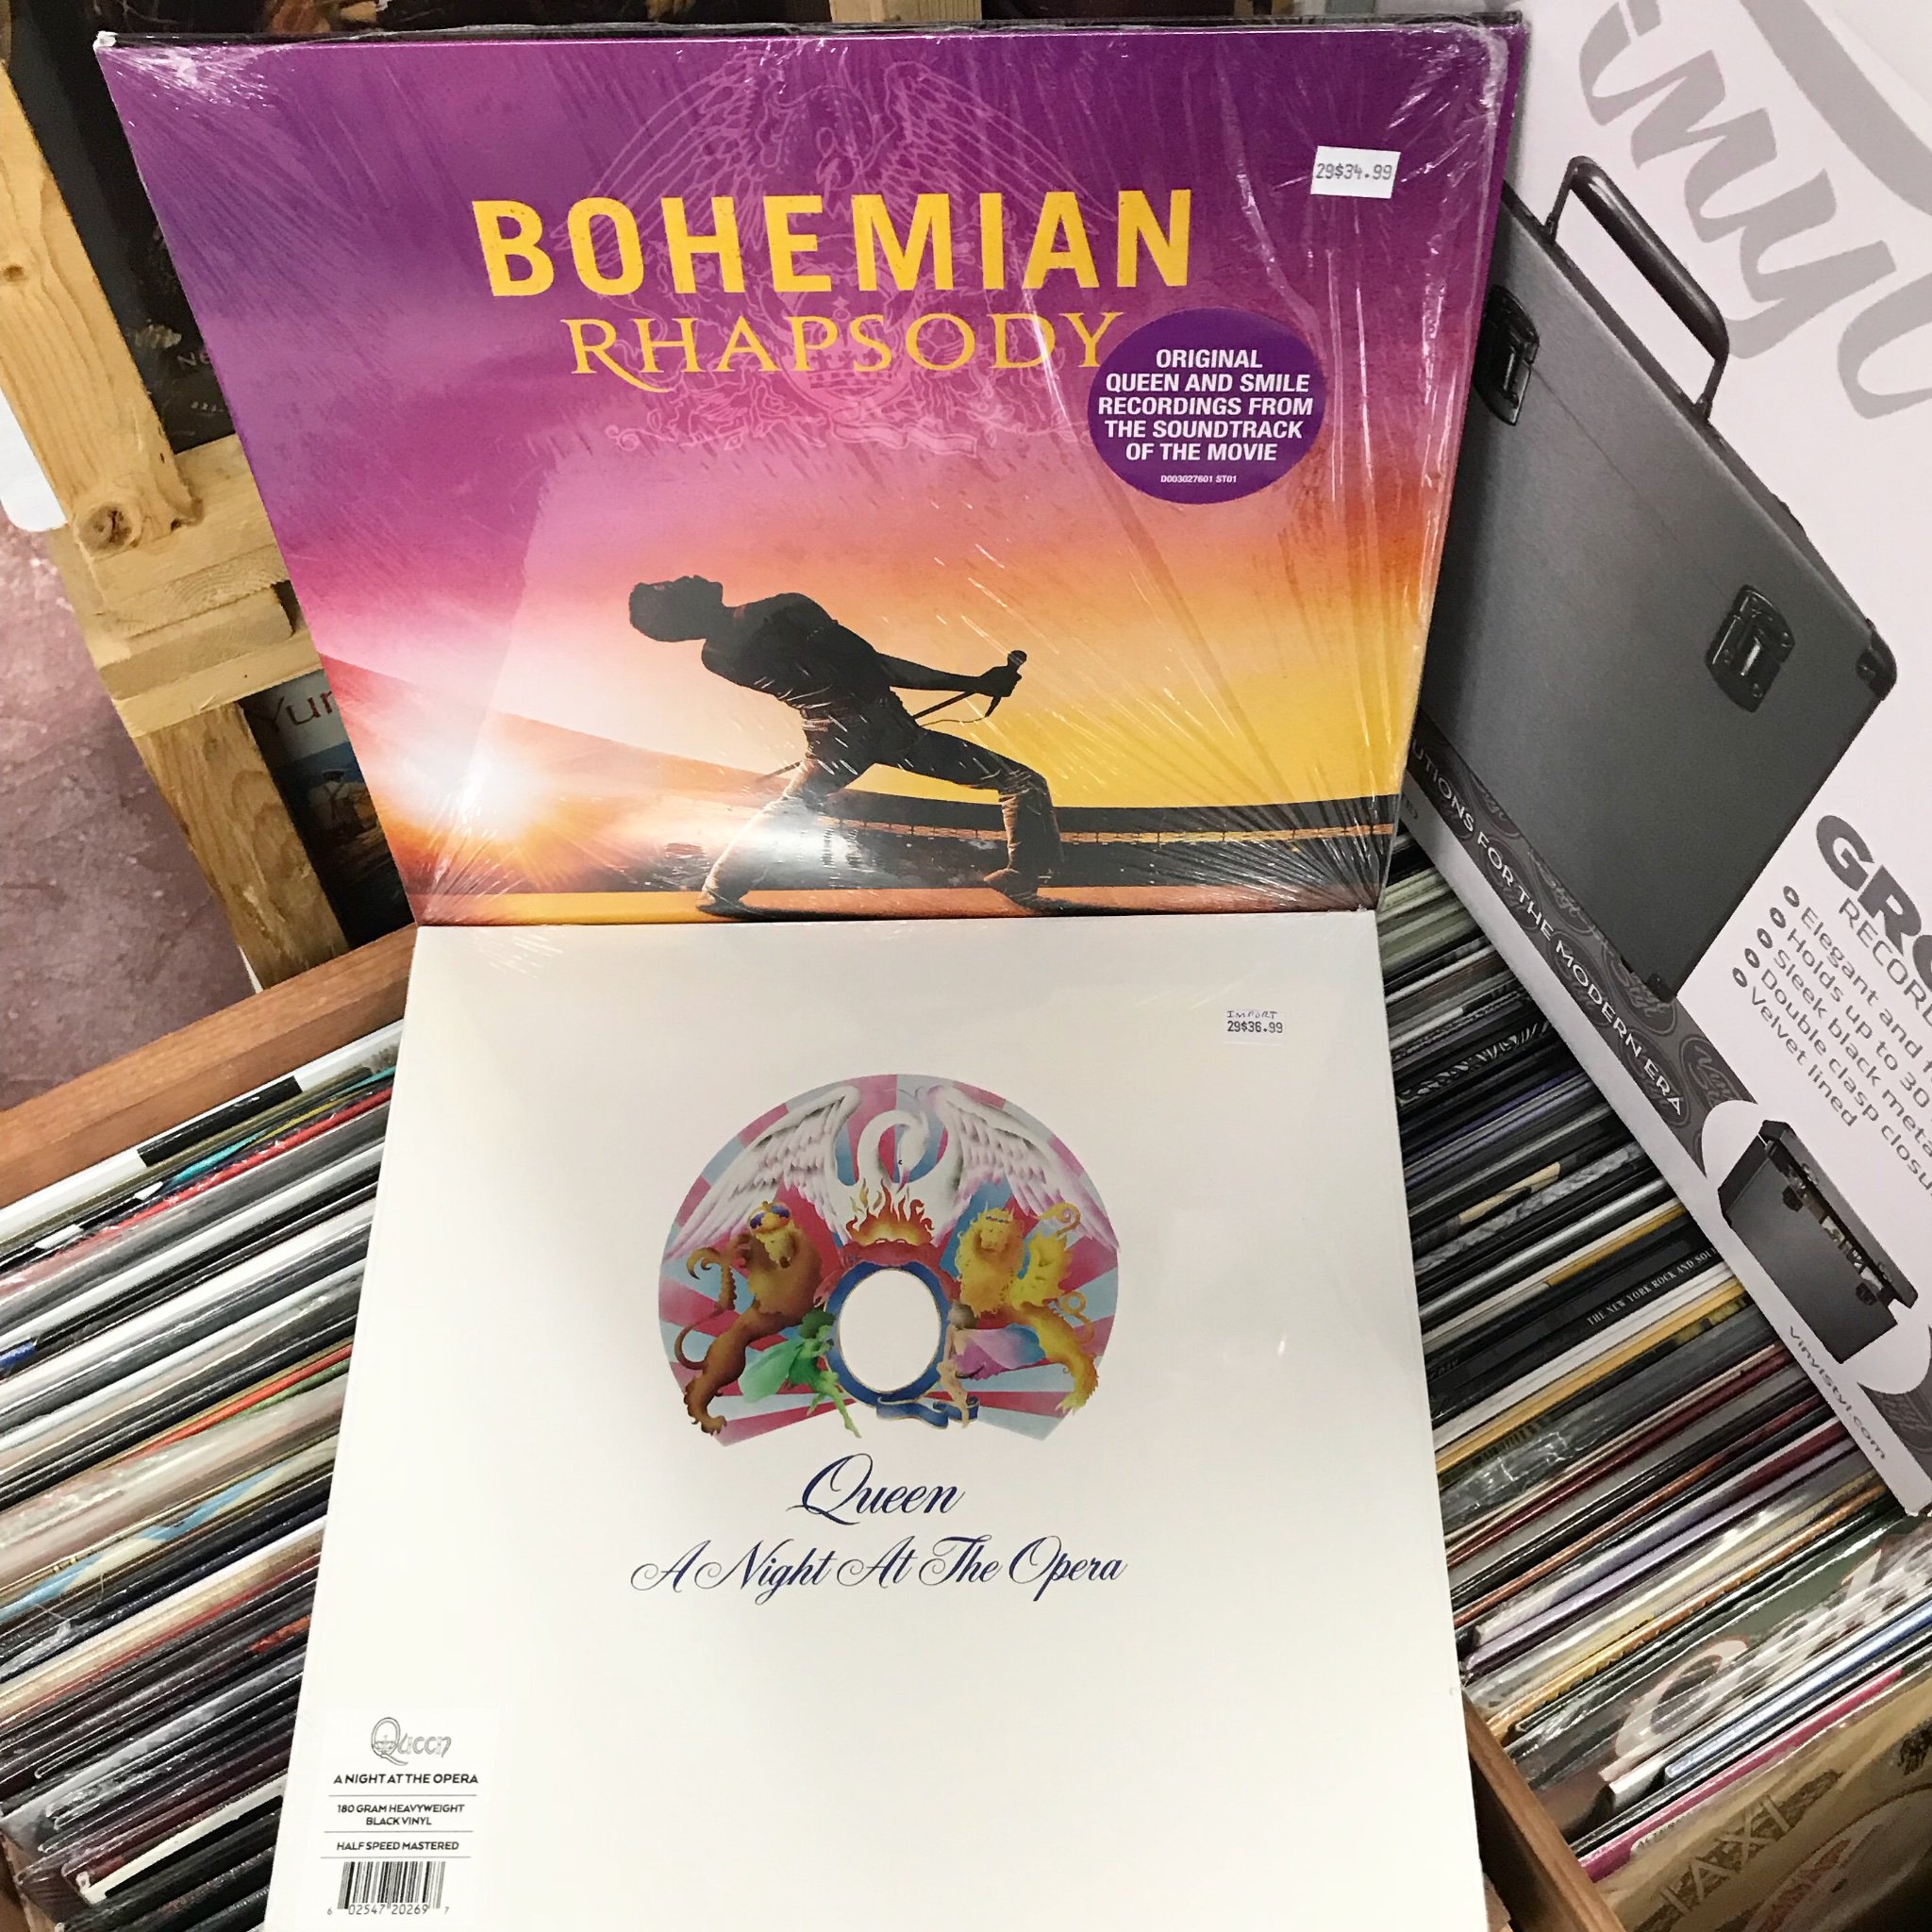 Lil Sportsmand Betydning Spin Records on Twitter: "#Queen “Bohemian Rhapsody” #Soundtrack &amp; “A  Night At The Opera” back in stock. #Vinyl https://t.co/fNwX7LG1mV" / Twitter